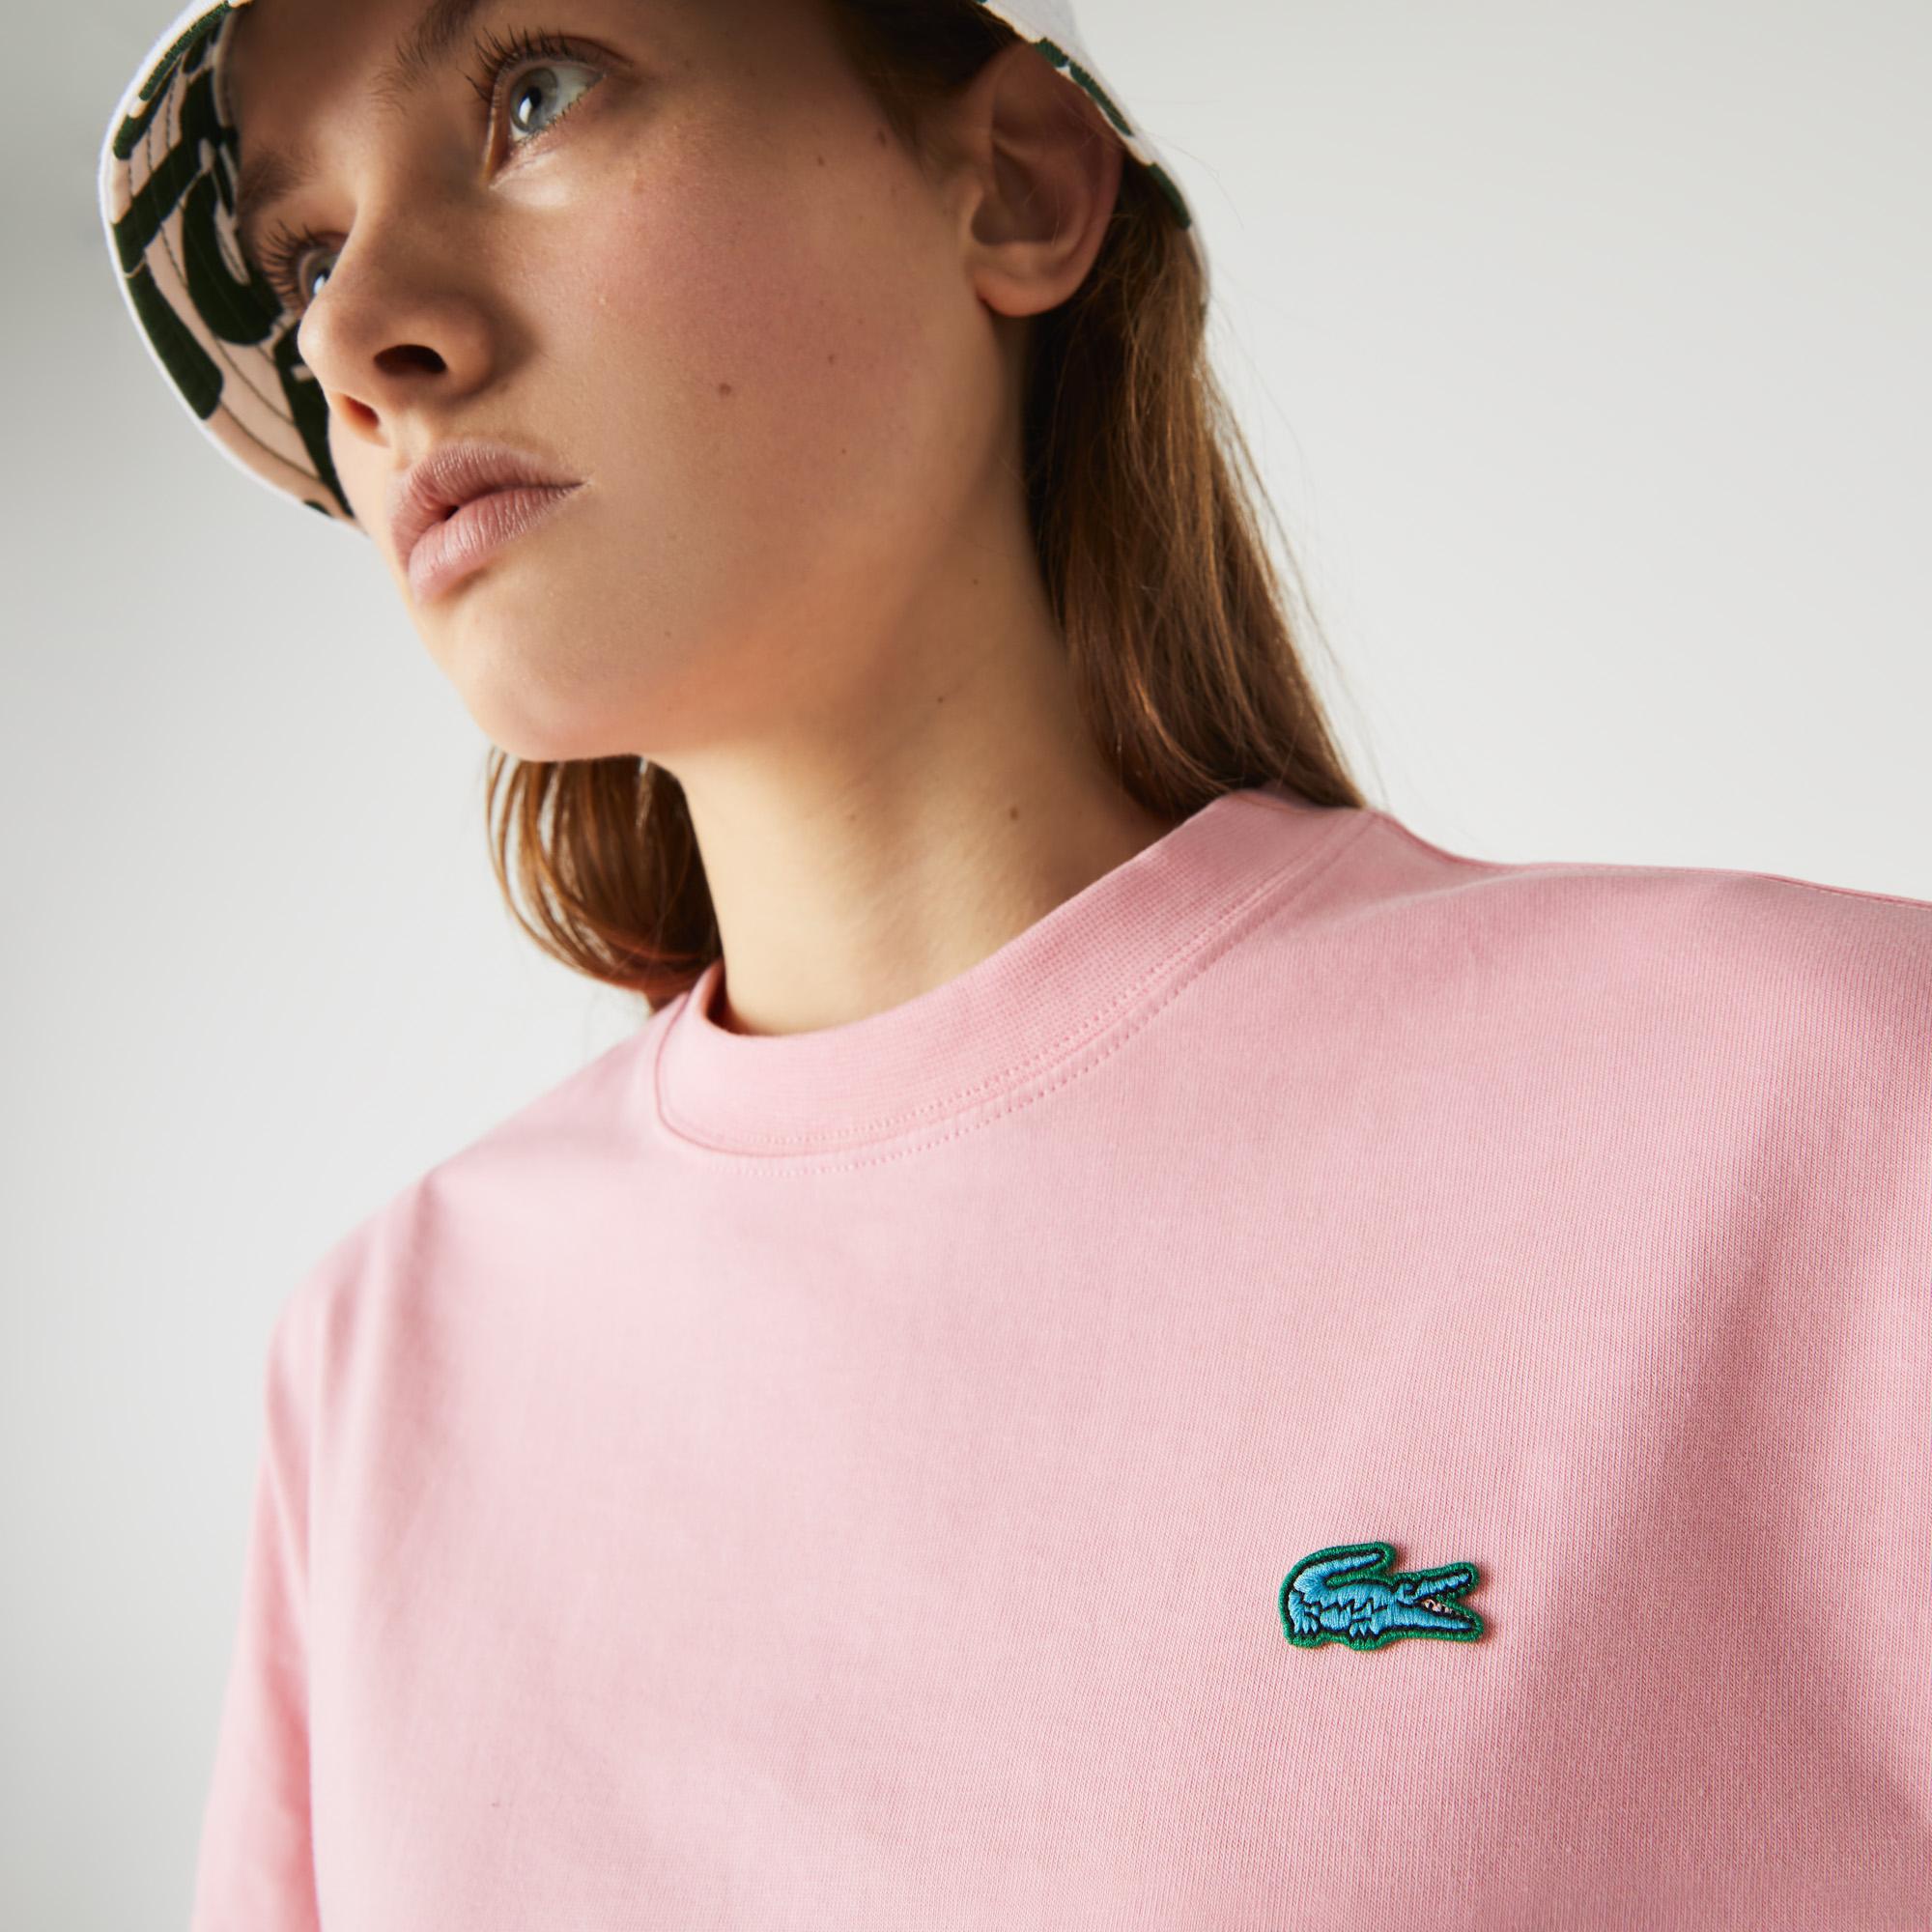 Lacoste L!VE Unisex Relaxed Fit Bisiklet Yaka Pembe T-Shirt. 6